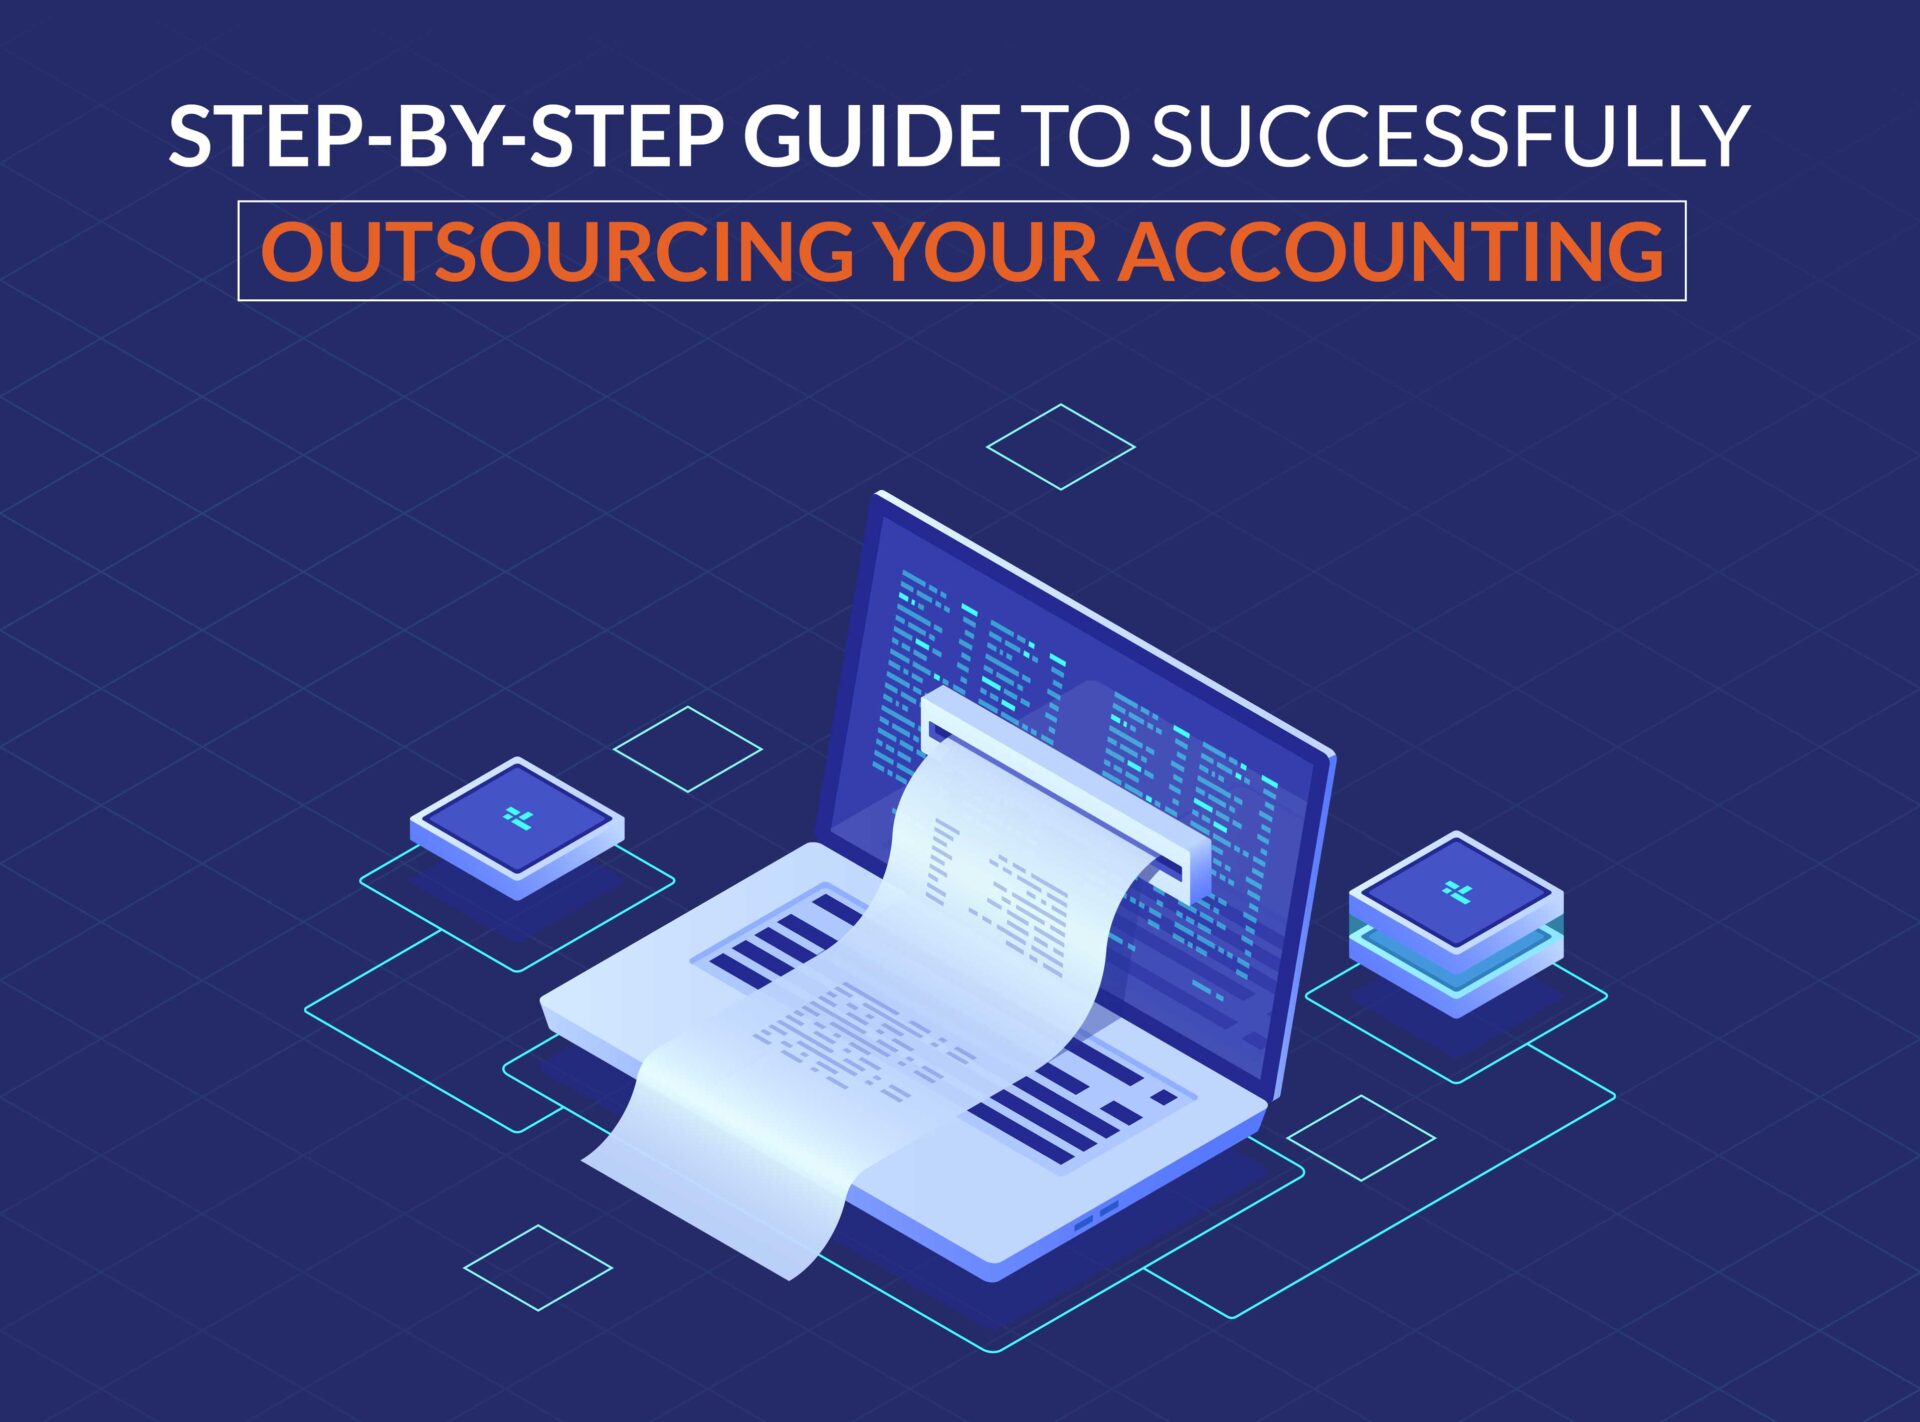 Step-by-Step Guide to Successfully Outsourcing Your Accounting